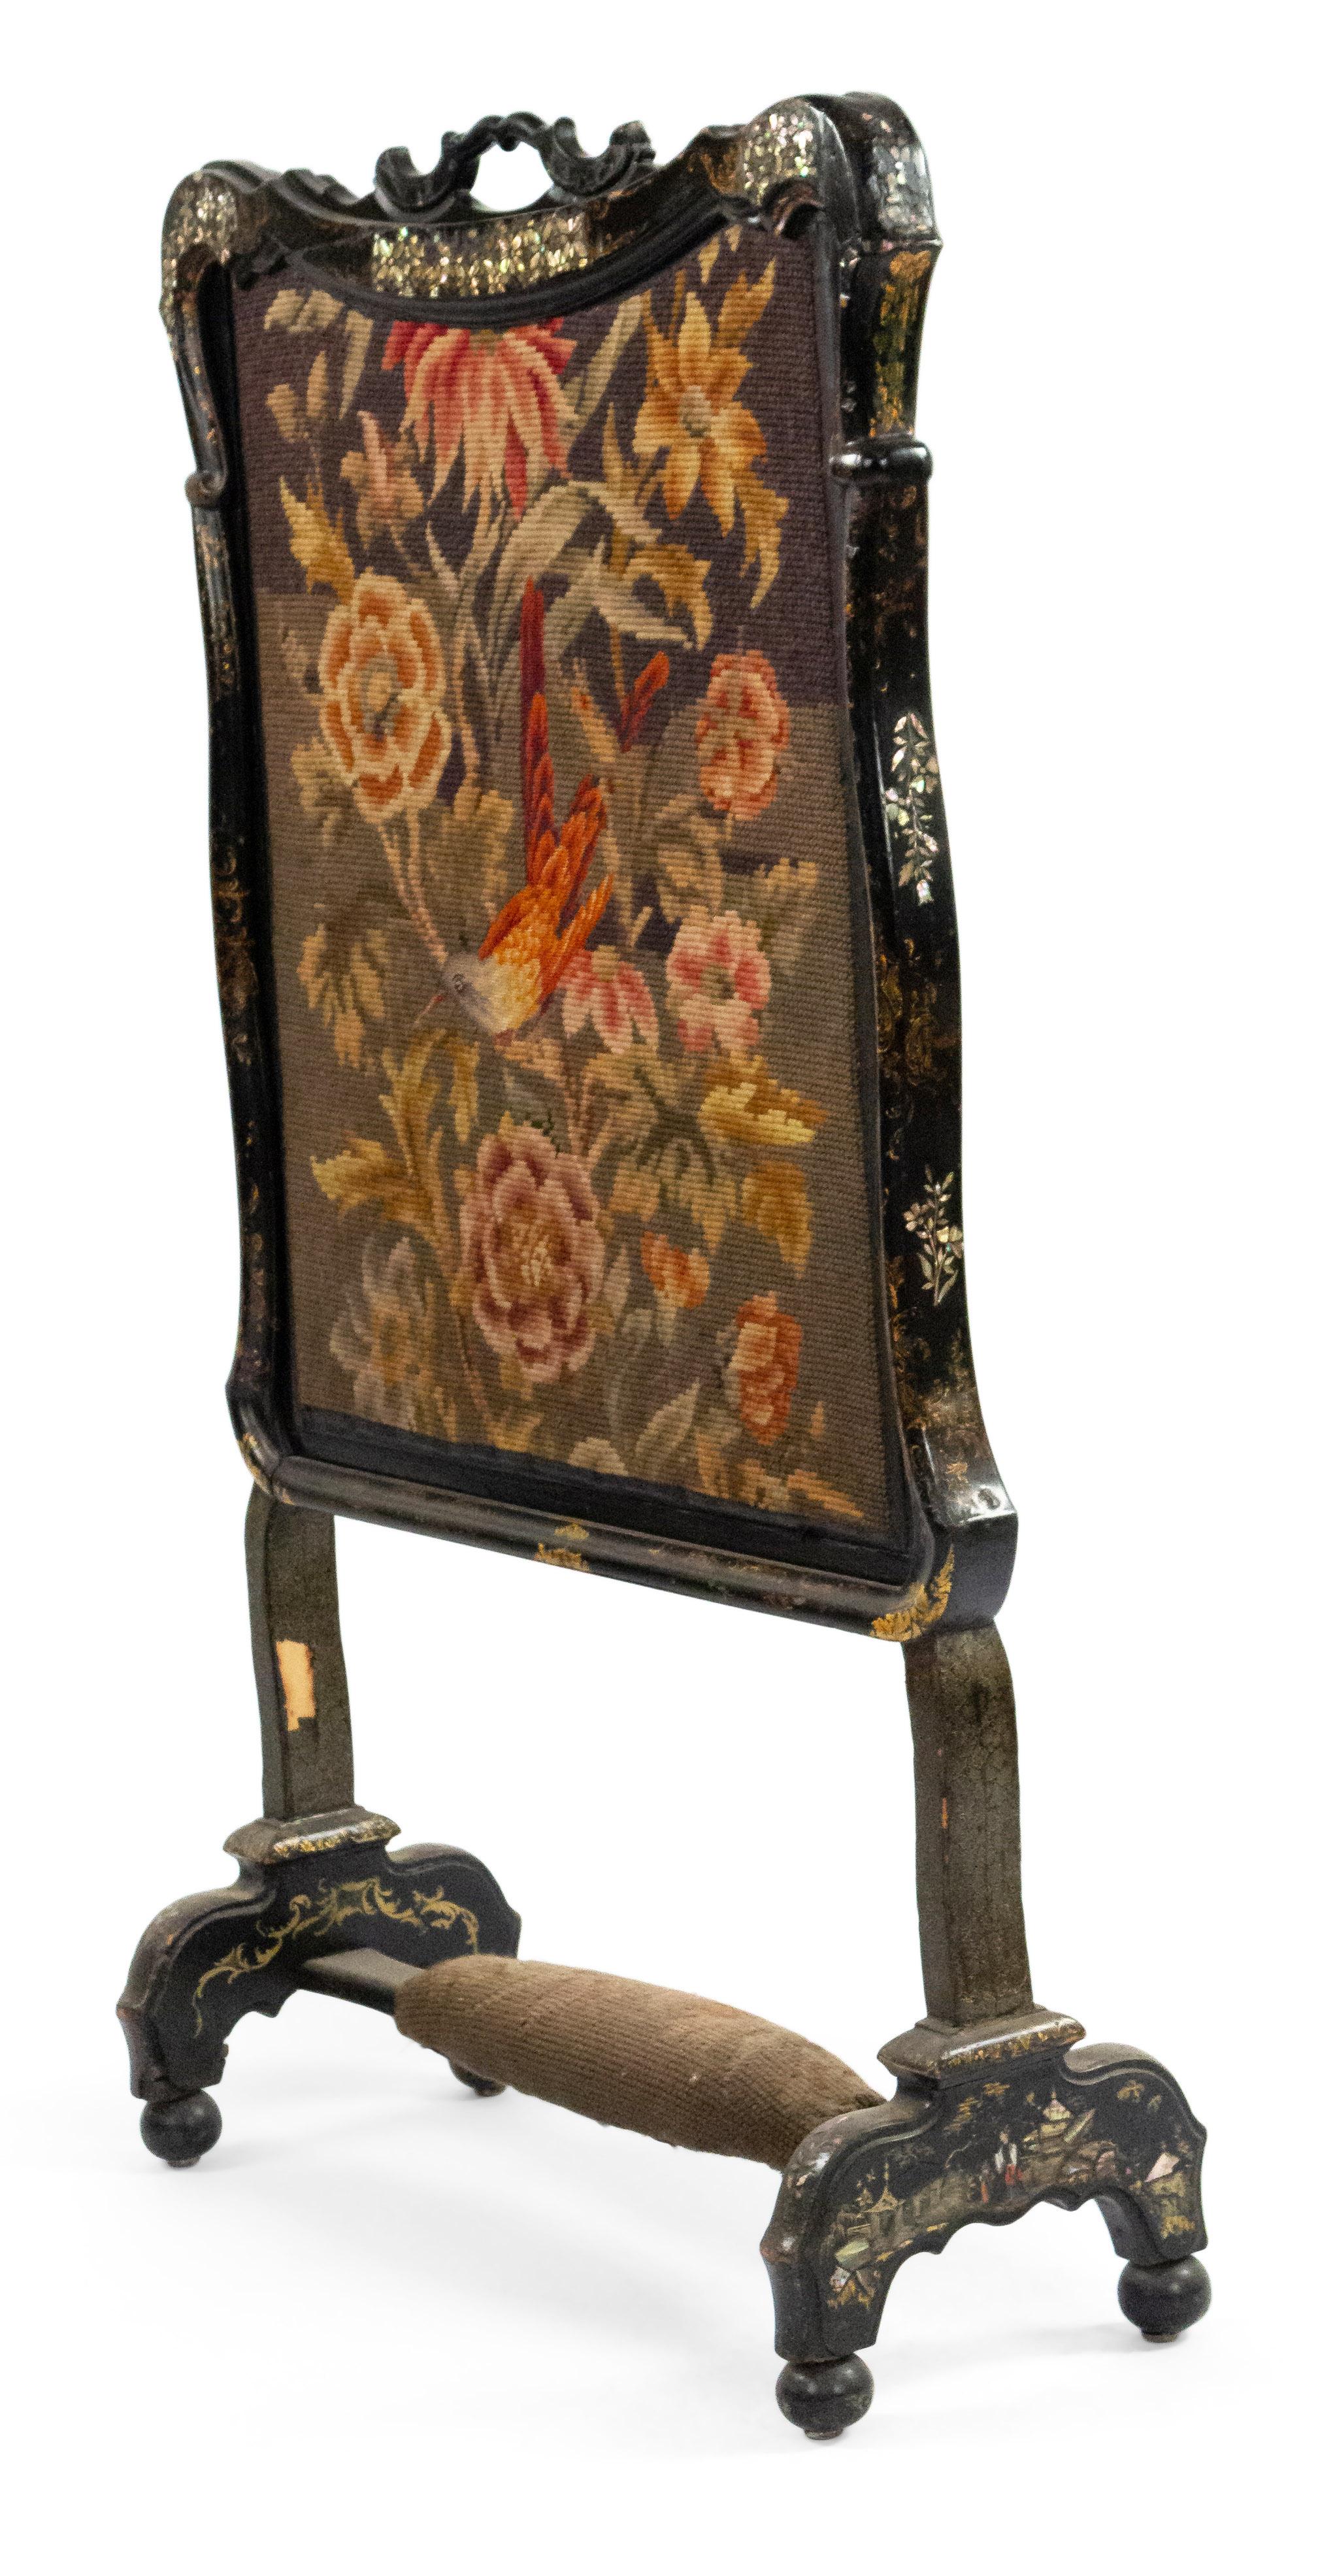 English Victorian papier-mâché pearl inlaid black lacquered fire screen with needlepoint panel depicting a bird sitting on a floral spray.